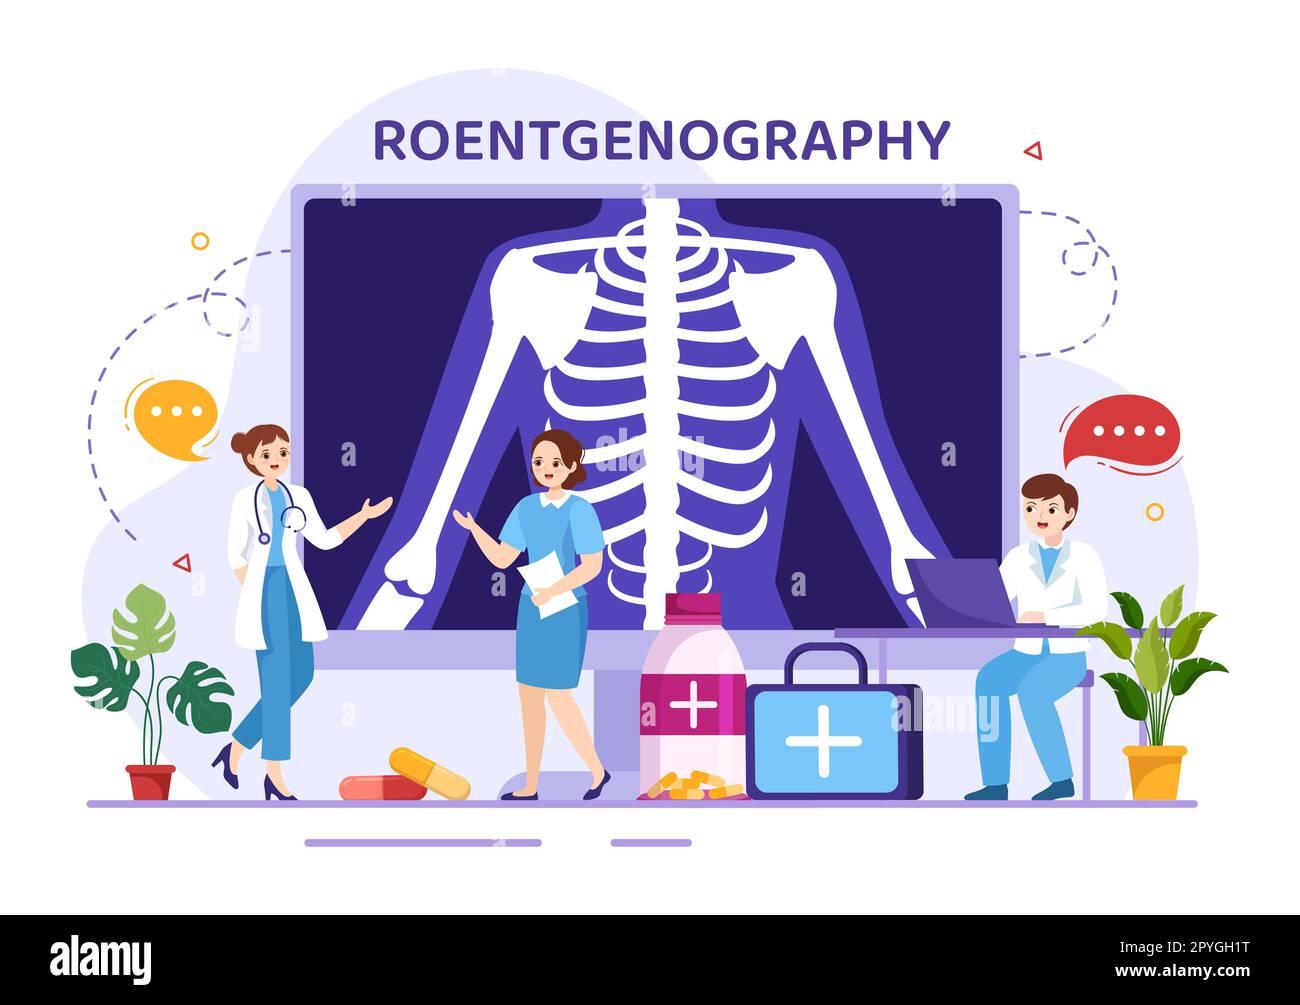 Roentgenography Illustration with Fluorography Body Checkup Procedure, X-ray Scanning or Roentgen in Health Care Flat Cartoon Hand Drawn Templates Stock Photo